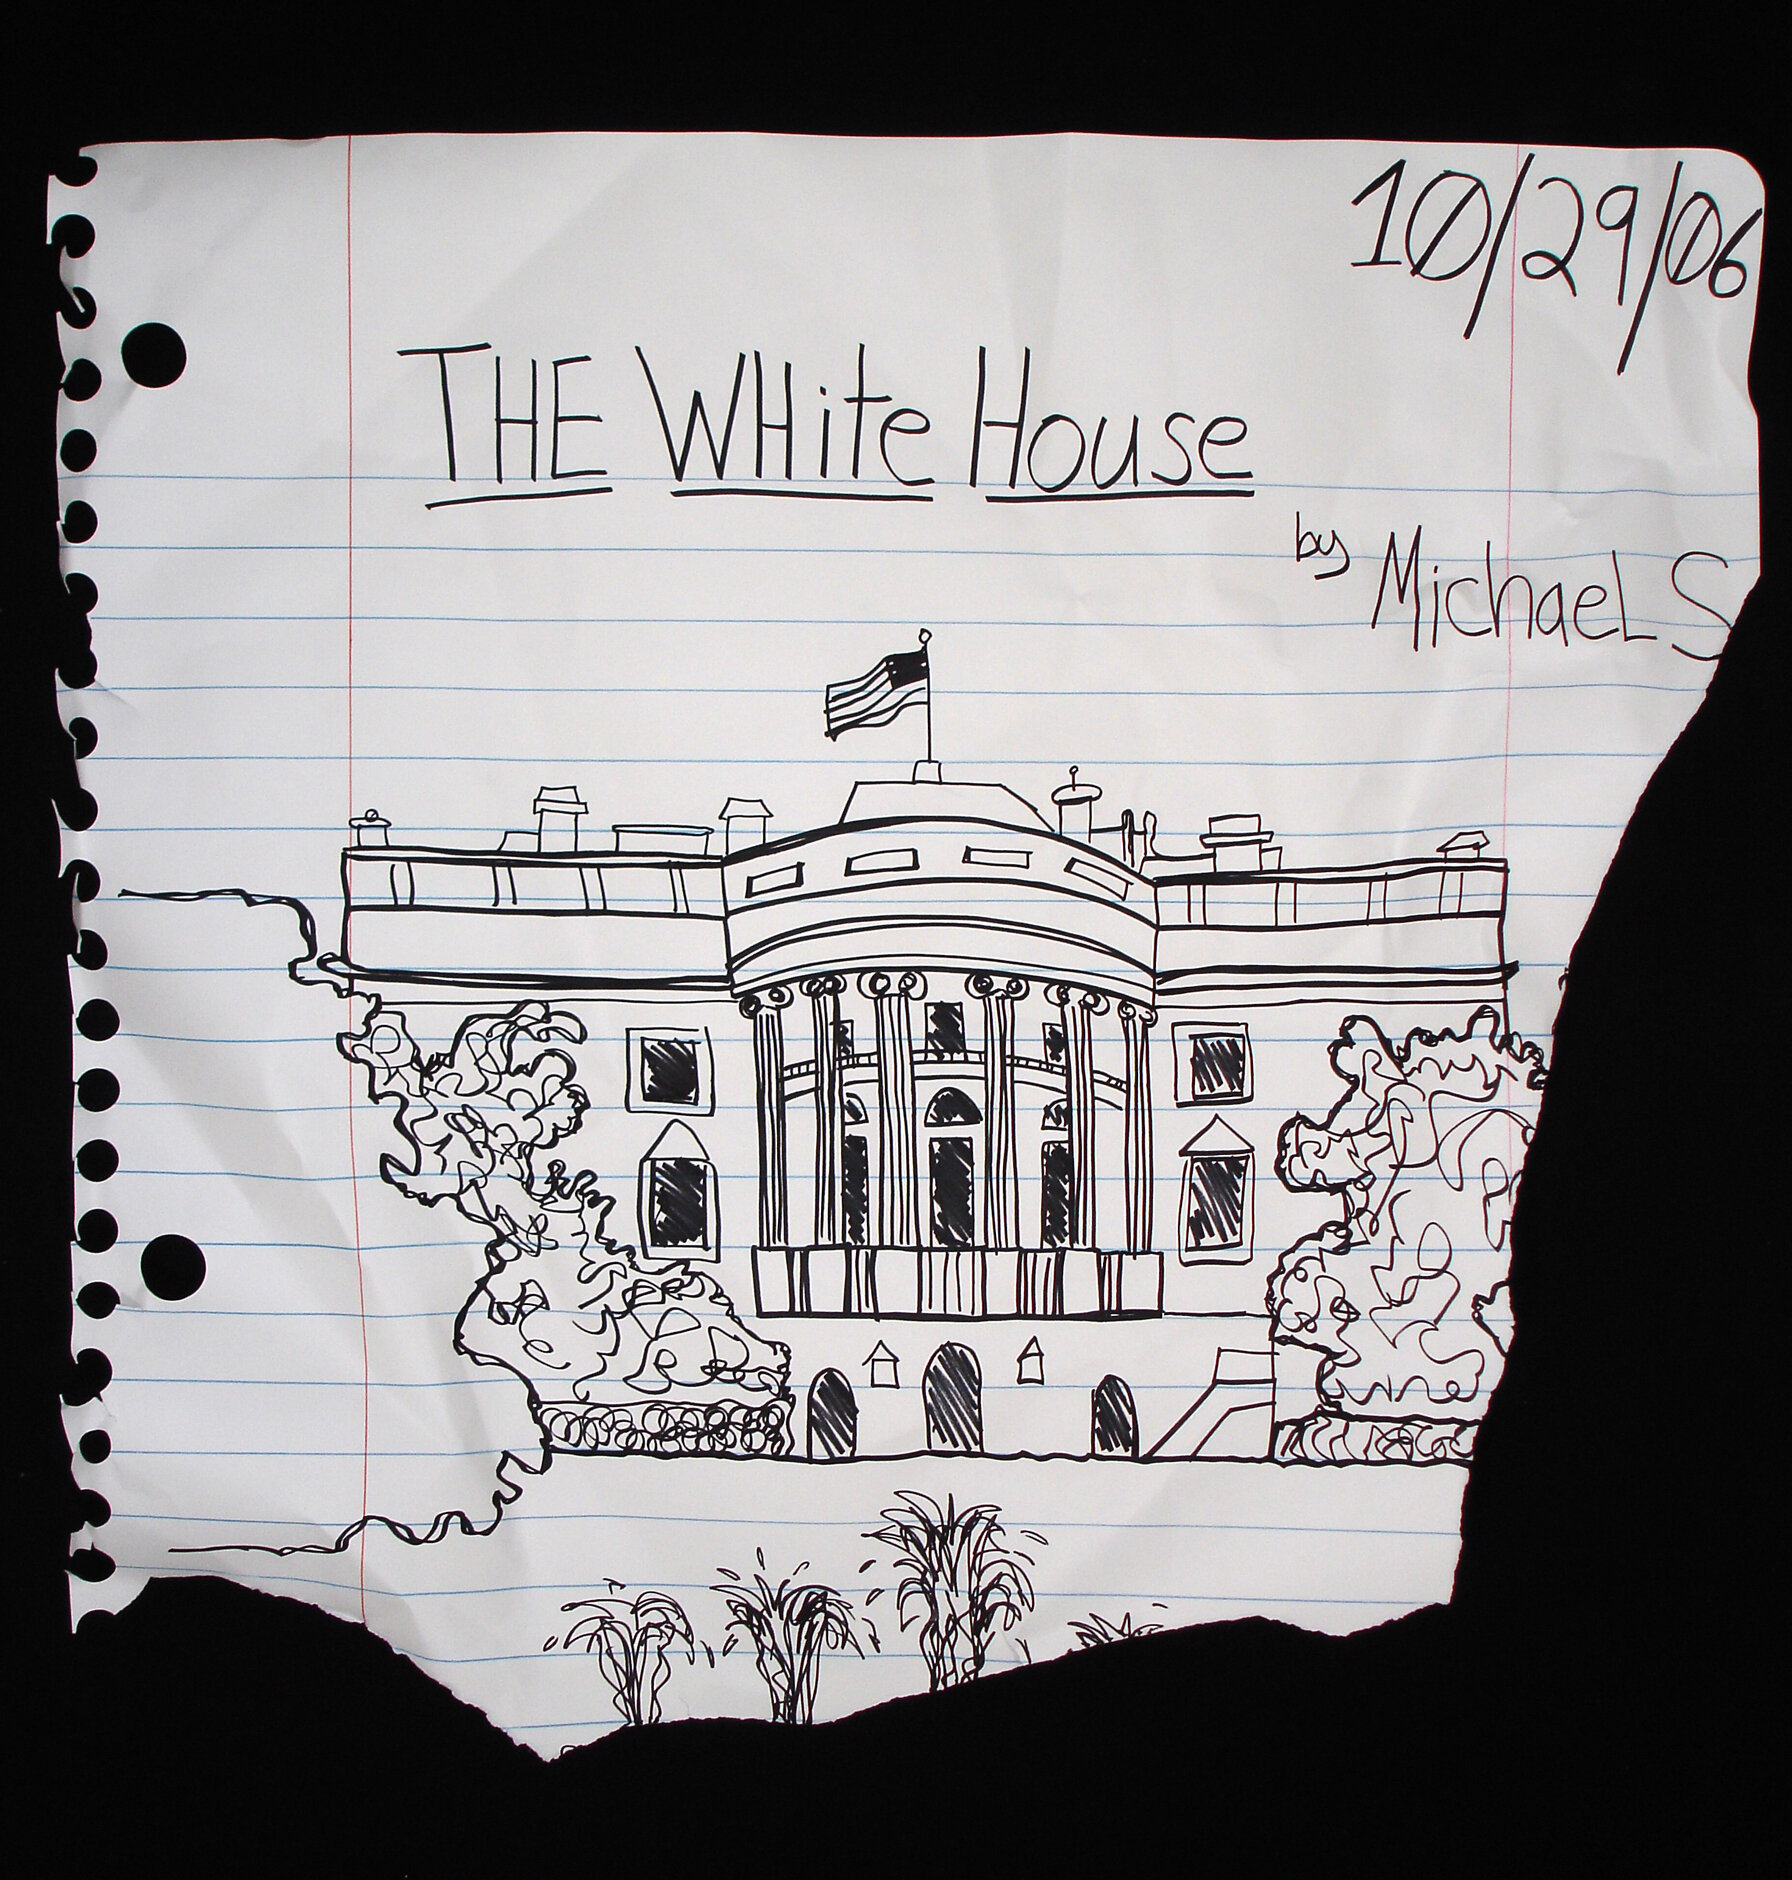  Michael Scoggins,  The White House III, 2006 .  Marker, colored pencil on paper 48 x 51 in.    